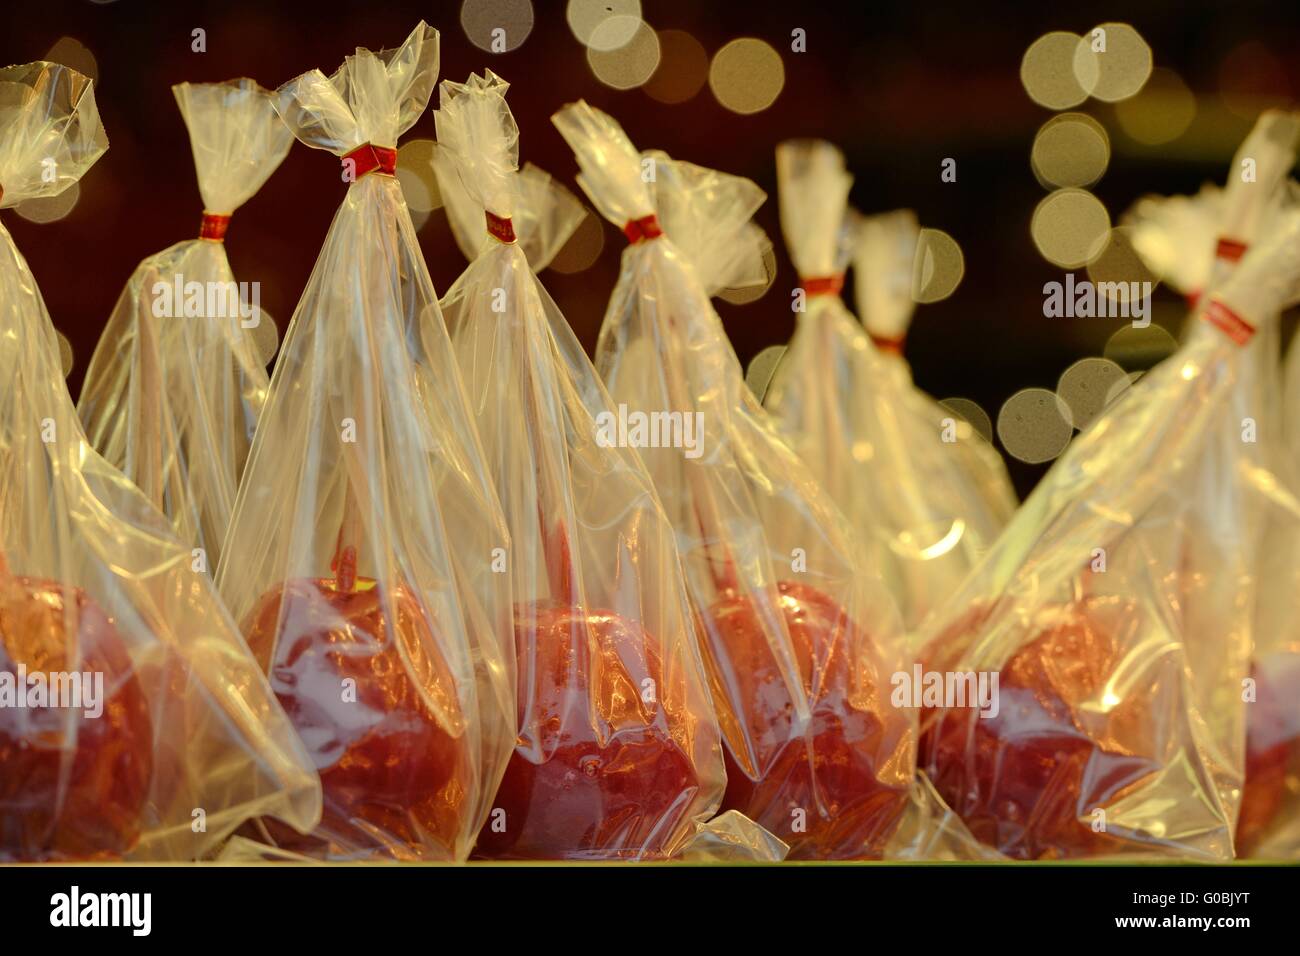 candied apples Stock Photo